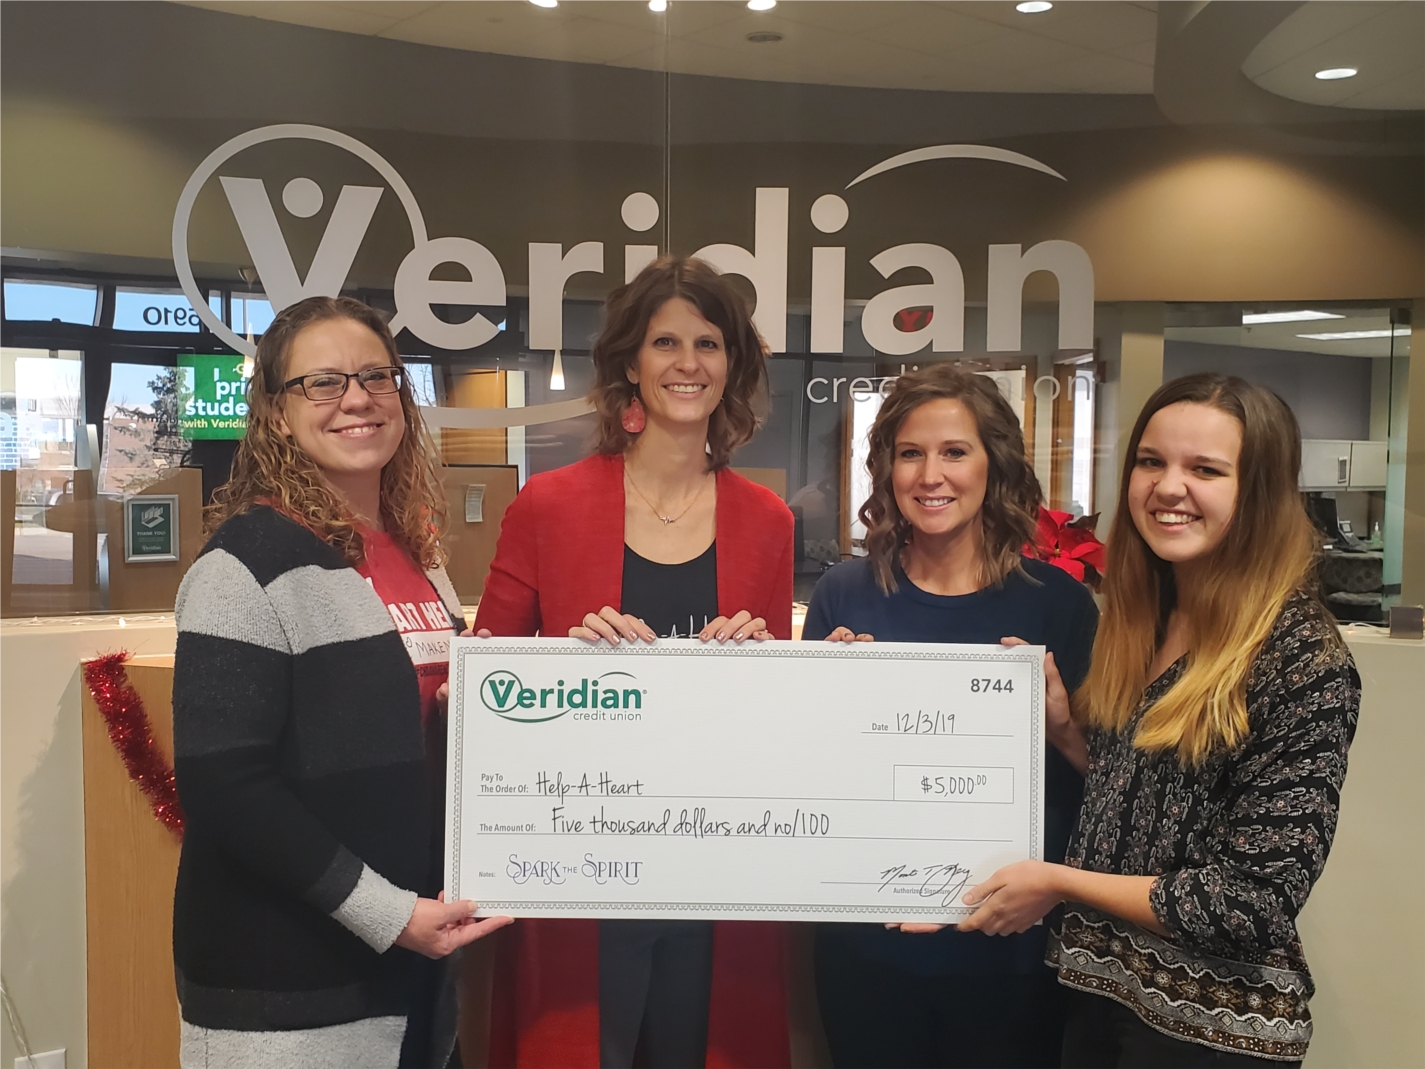 Veridian employees nominate local nonprofit organizations for a chance to win up to $5,000 in our annual Spark the Spirit giving campaign. Veridian members and the public are invited to submit their votes to determine which organizations will receive funding.